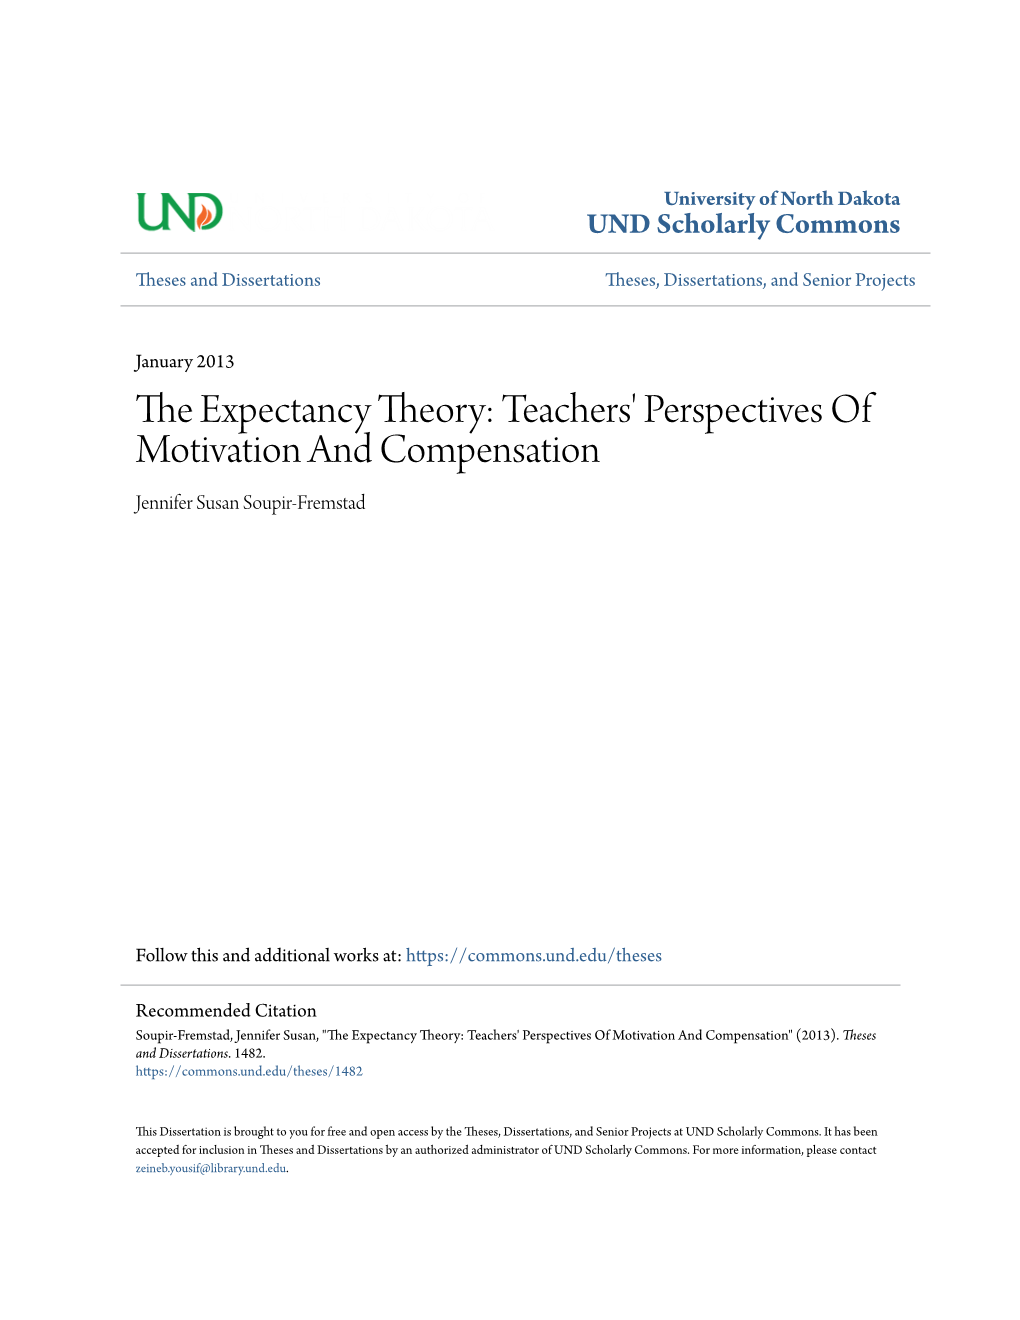 The Expectancy Theory: Teachers' Perspectives of Motivation and Compensation Jennifer Susan Soupir-Fremstad